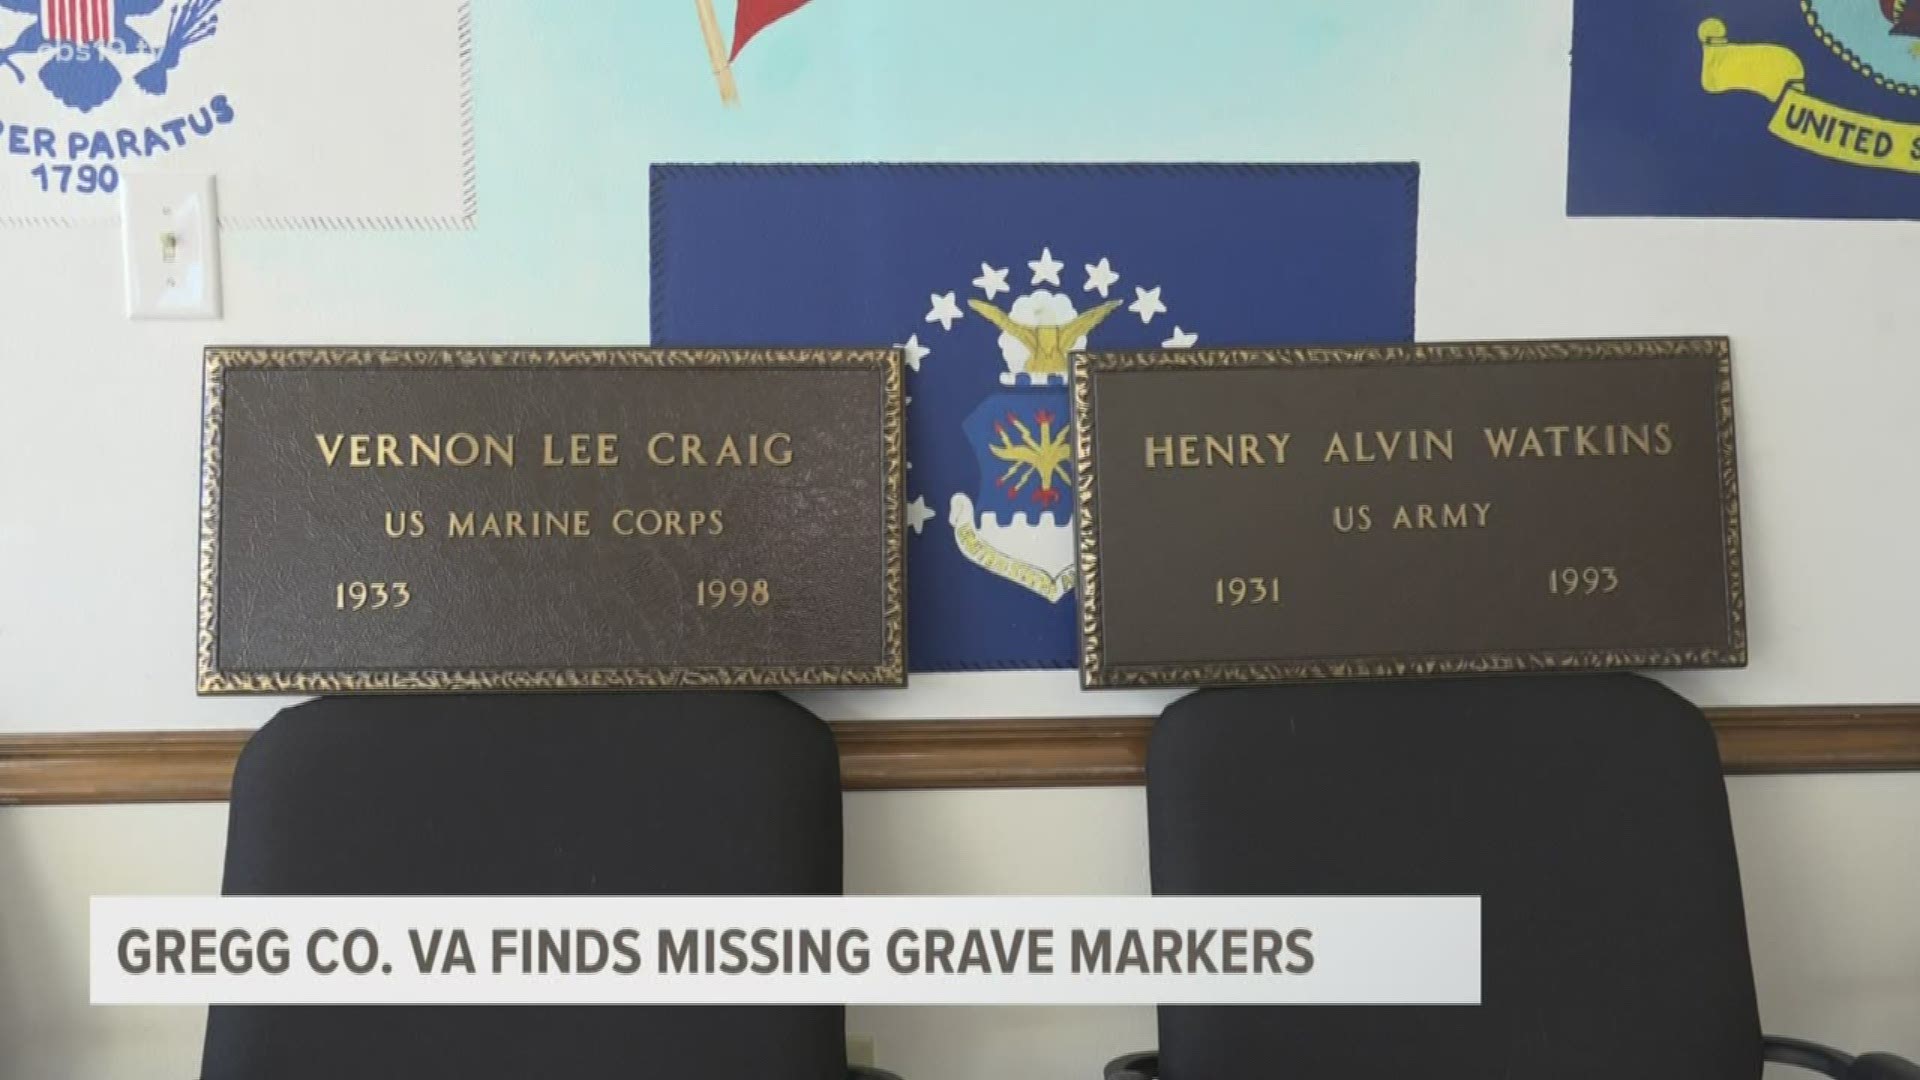 A Gregg County Veterans Services employee recently received to grave-markers that were never placed on the final resting place of the men they belong to.